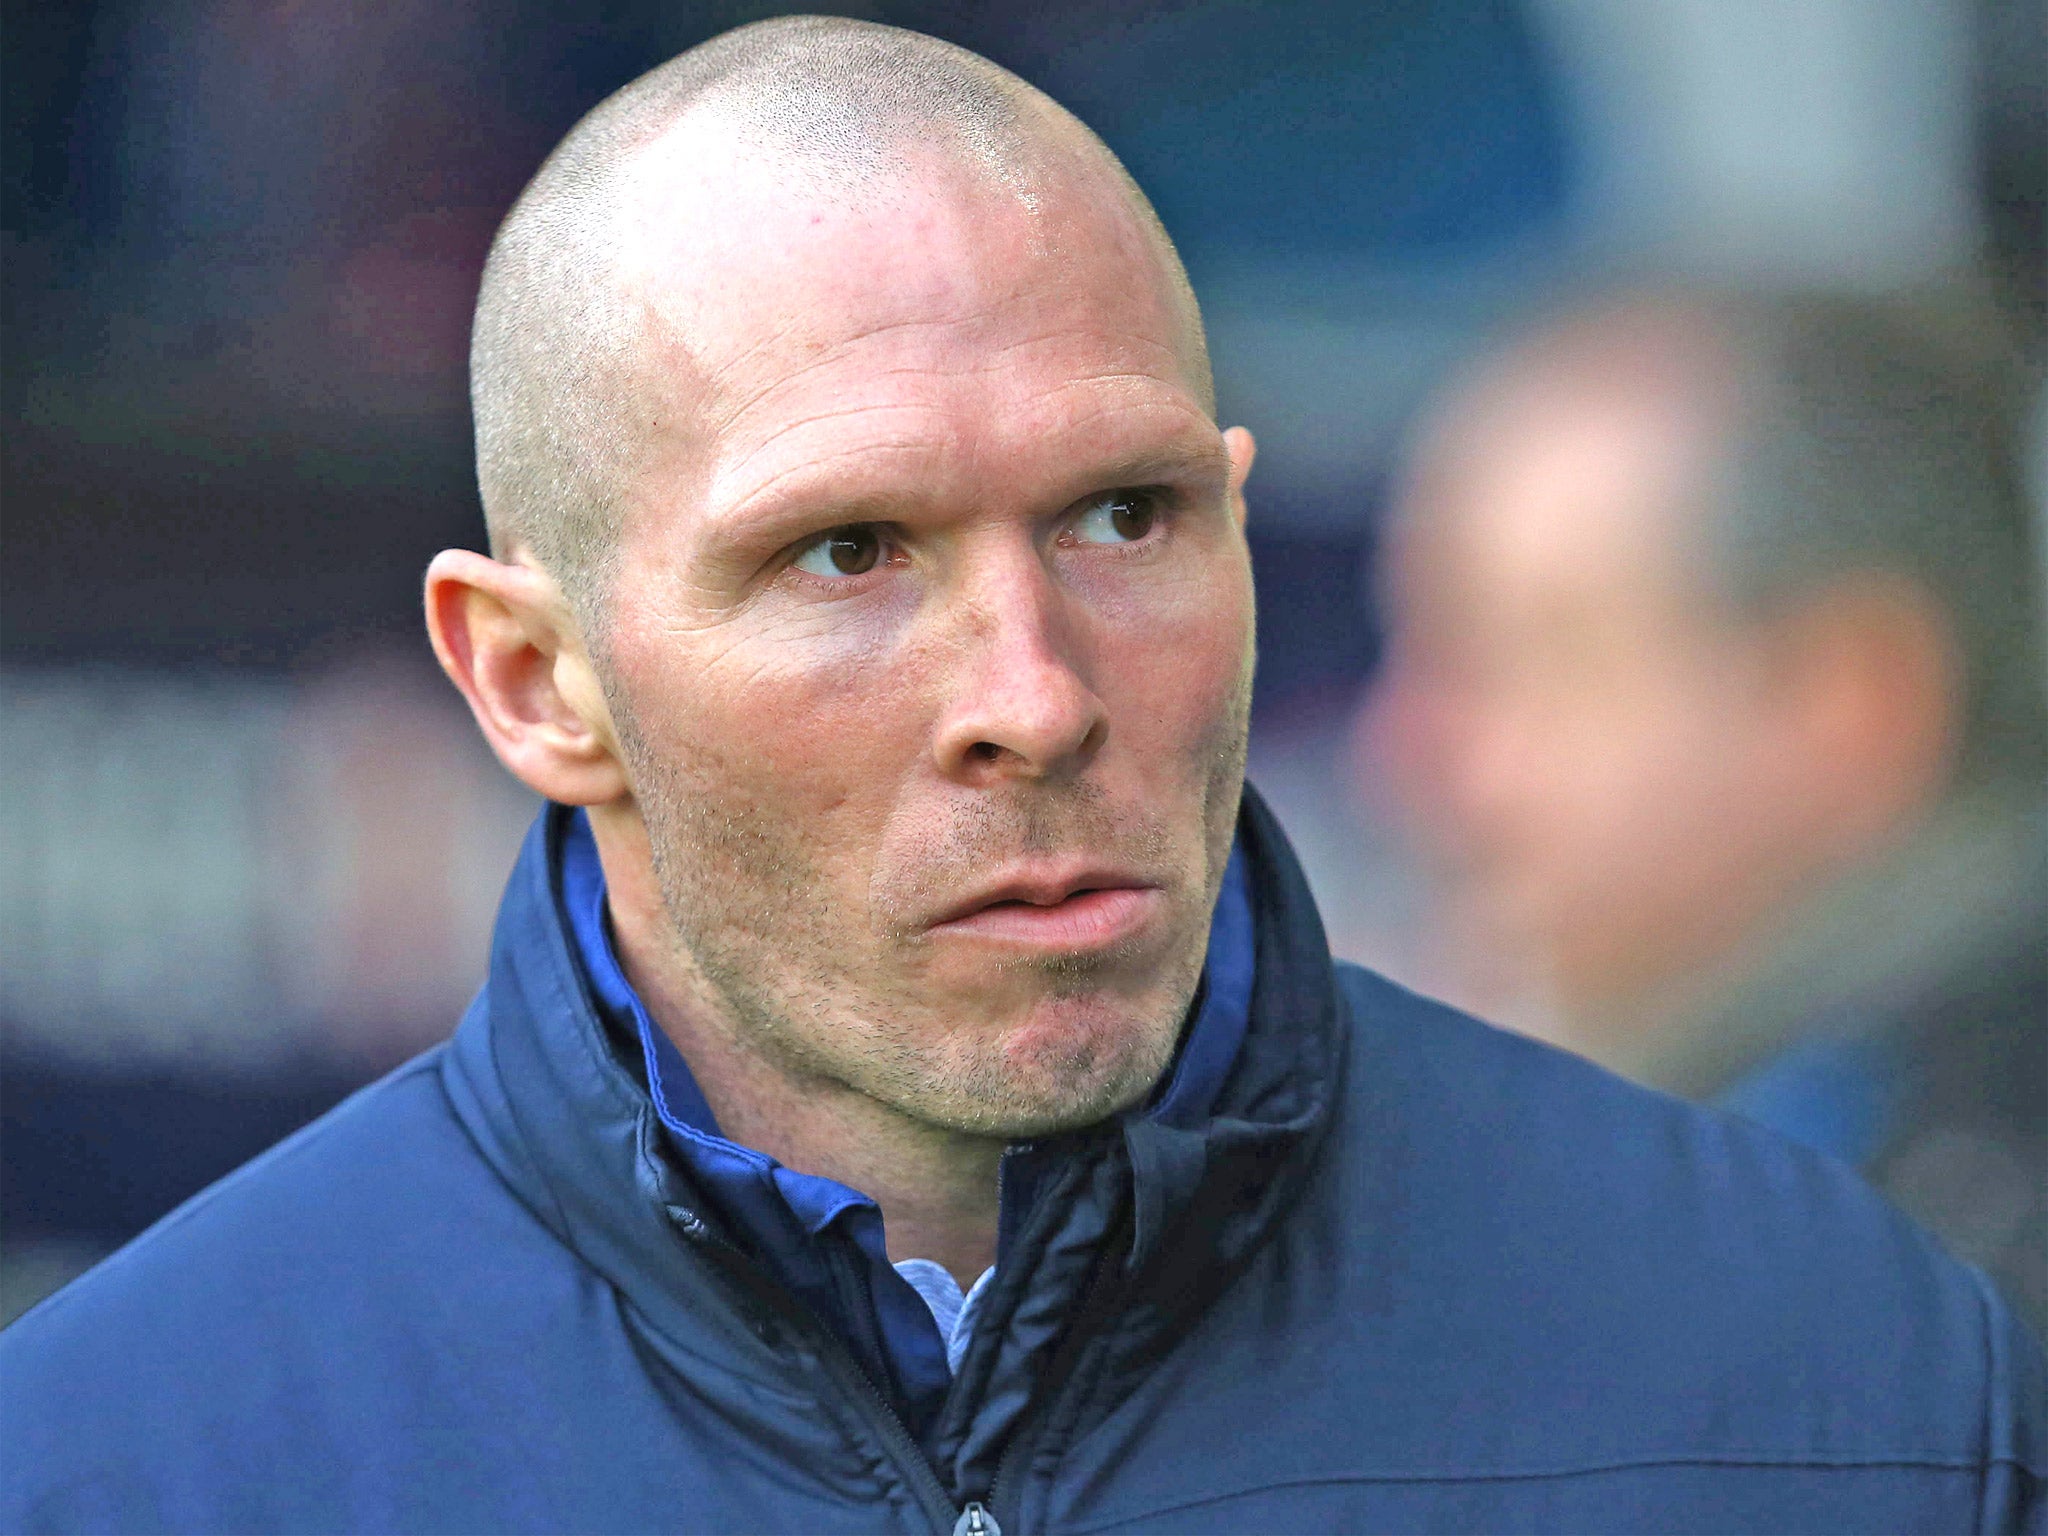 Michael Appleton was sacked by Blackburn on 19 March but still has no pay-off agreement